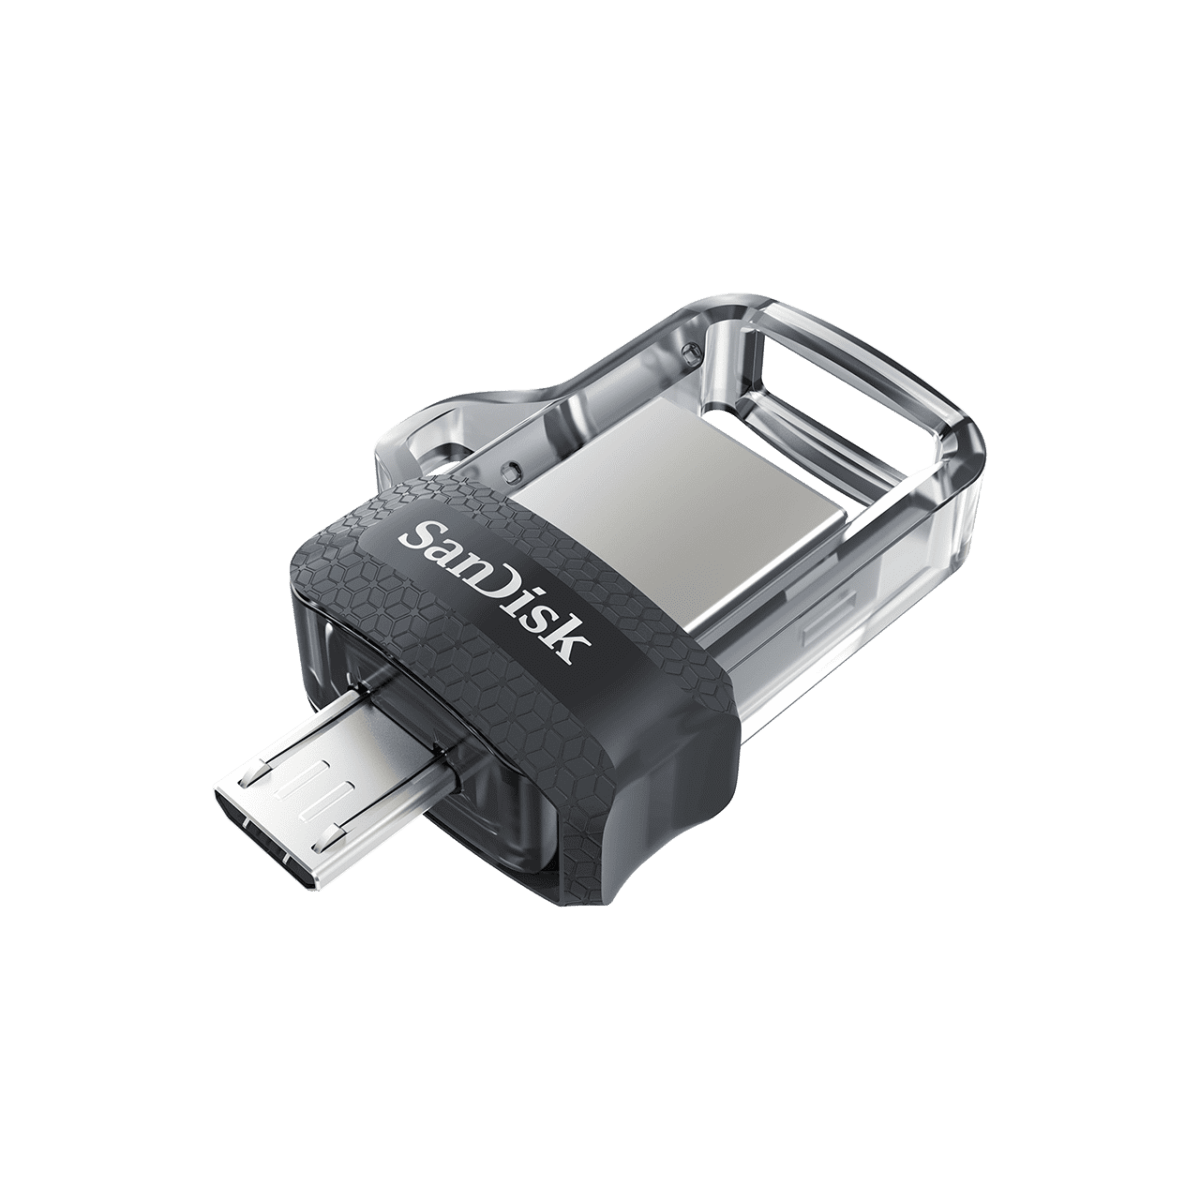 Ultra Dual Drive Usb M 3 Open Angled2.Png.thumb .1280.1280 Sandisk &Amp;Lt;Div Class=&Amp;Quot;Active&Amp;Quot; Data-Sku=&Amp;Quot;Sddd3-016G-A46&Amp;Quot;&Amp;Gt; &Amp;Lt;H1&Amp;Gt;Instantly Free Up Space On Your Android Smartphone&Amp;Lt;/H1&Amp;Gt; &Amp;Lt;Div Class=&Amp;Quot;Inheritpara Mb-4&Amp;Quot;&Amp;Gt; The Sandisk Ultra® Dual Drive M3.0 Makes It Easy To Transfer Content From Your Phone To Your Computer. With A Micro-Usb Connector On One End And A Usb 3.0 Connector On The Other, The Drive Lets You Move Content Easily Between Your Devices—From Your Android™ Smartphone Or Tablet To Your Laptop, Pc Or Mac Computer&Amp;Lt;A Class=&Amp;Quot;Disclosure&Amp;Quot; Href=&Amp;Quot;Https://Shop.westerndigital.com/Products/Usb-Flash-Drives/Sandisk-Ultra-Dual-Drive-M30-Usb-3-0-Micro-Usb#Disclosures&Amp;Quot; Target=&Amp;Quot;_Self&Amp;Quot; Rel=&Amp;Quot;Noopener Noreferrer&Amp;Quot; Aria-Labelledby=&Amp;Quot;Disclosures&Amp;Quot;&Amp;Gt;&Amp;Lt;Sup&Amp;Gt;1&Amp;Lt;/Sup&Amp;Gt;&Amp;Lt;/A&Amp;Gt;. The Usb 3.0 Connector Is High-Performance And Backward-Compatible With Usb 2.0 Ports. The Sandisk® Memory Zone App&Amp;Lt;A Class=&Amp;Quot;Disclosure&Amp;Quot; Href=&Amp;Quot;Https://Shop.westerndigital.com/Products/Usb-Flash-Drives/Sandisk-Ultra-Dual-Drive-M30-Usb-3-0-Micro-Usb#Disclosures&Amp;Quot; Target=&Amp;Quot;_Self&Amp;Quot; Rel=&Amp;Quot;Noopener Noreferrer&Amp;Quot; Aria-Labelledby=&Amp;Quot;Disclosures&Amp;Quot;&Amp;Gt;&Amp;Lt;Sup&Amp;Gt;2&Amp;Lt;/Sup&Amp;Gt;&Amp;Lt;/A&Amp;Gt; For Android (Available On Google Play) Helps You Manage Your Device’s Memory And Your Content. &Amp;Lt;Strong&Amp;Gt;Warranty&Amp;Lt;/Strong&Amp;Gt; The Sandisk Ultra Flair Usb 3.0 Flash Drive Is Backed By A Five-Year Manufacturer Warranty&Amp;Lt;A Class=&Amp;Quot;Disclosure&Amp;Quot; Href=&Amp;Quot;Https://Shop.westerndigital.com/Products/Usb-Flash-Drives/Sandisk-Ultra-Flair-Usb-3-0#Disclosures&Amp;Quot; Target=&Amp;Quot;_Self&Amp;Quot; Rel=&Amp;Quot;Noopener Noreferrer&Amp;Quot; Aria-Labelledby=&Amp;Quot;Disclosures&Amp;Quot;&Amp;Gt;&Amp;Lt;Sup&Amp;Gt;2&Amp;Lt;/Sup&Amp;Gt;&Amp;Lt;/A&Amp;Gt; &Amp;Lt;/Div&Amp;Gt; &Amp;Lt;/Div&Amp;Gt; Sandisk Ultra Dual Drive M3.0 Flash Drive For Android Smartphones (32Gb)